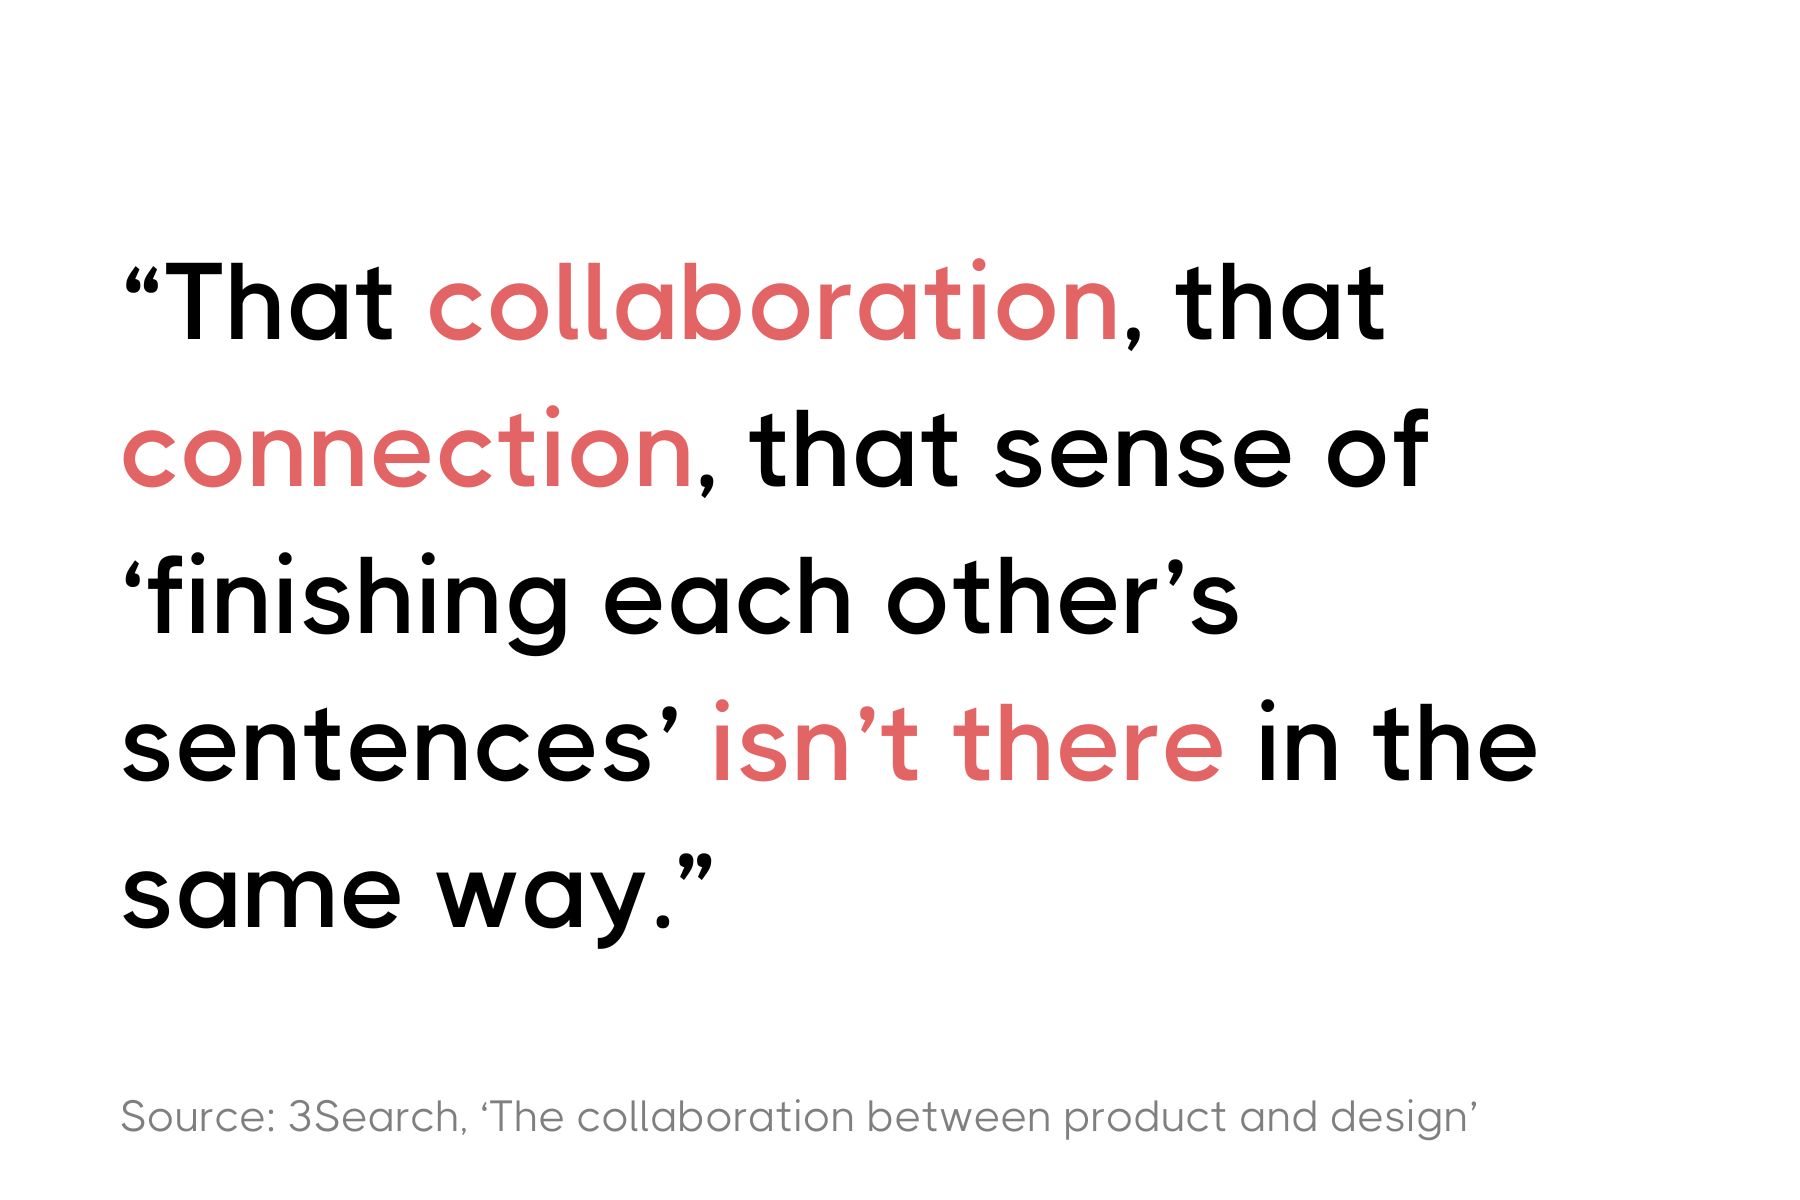 A minimalist graphic with a quote in red and black text that reads: "That collaboration, that connection, that sense of 'finishing each other's sentences' isn't there in the same way." Cited from a source titled 'The collaboration between product and design' by 3Search.